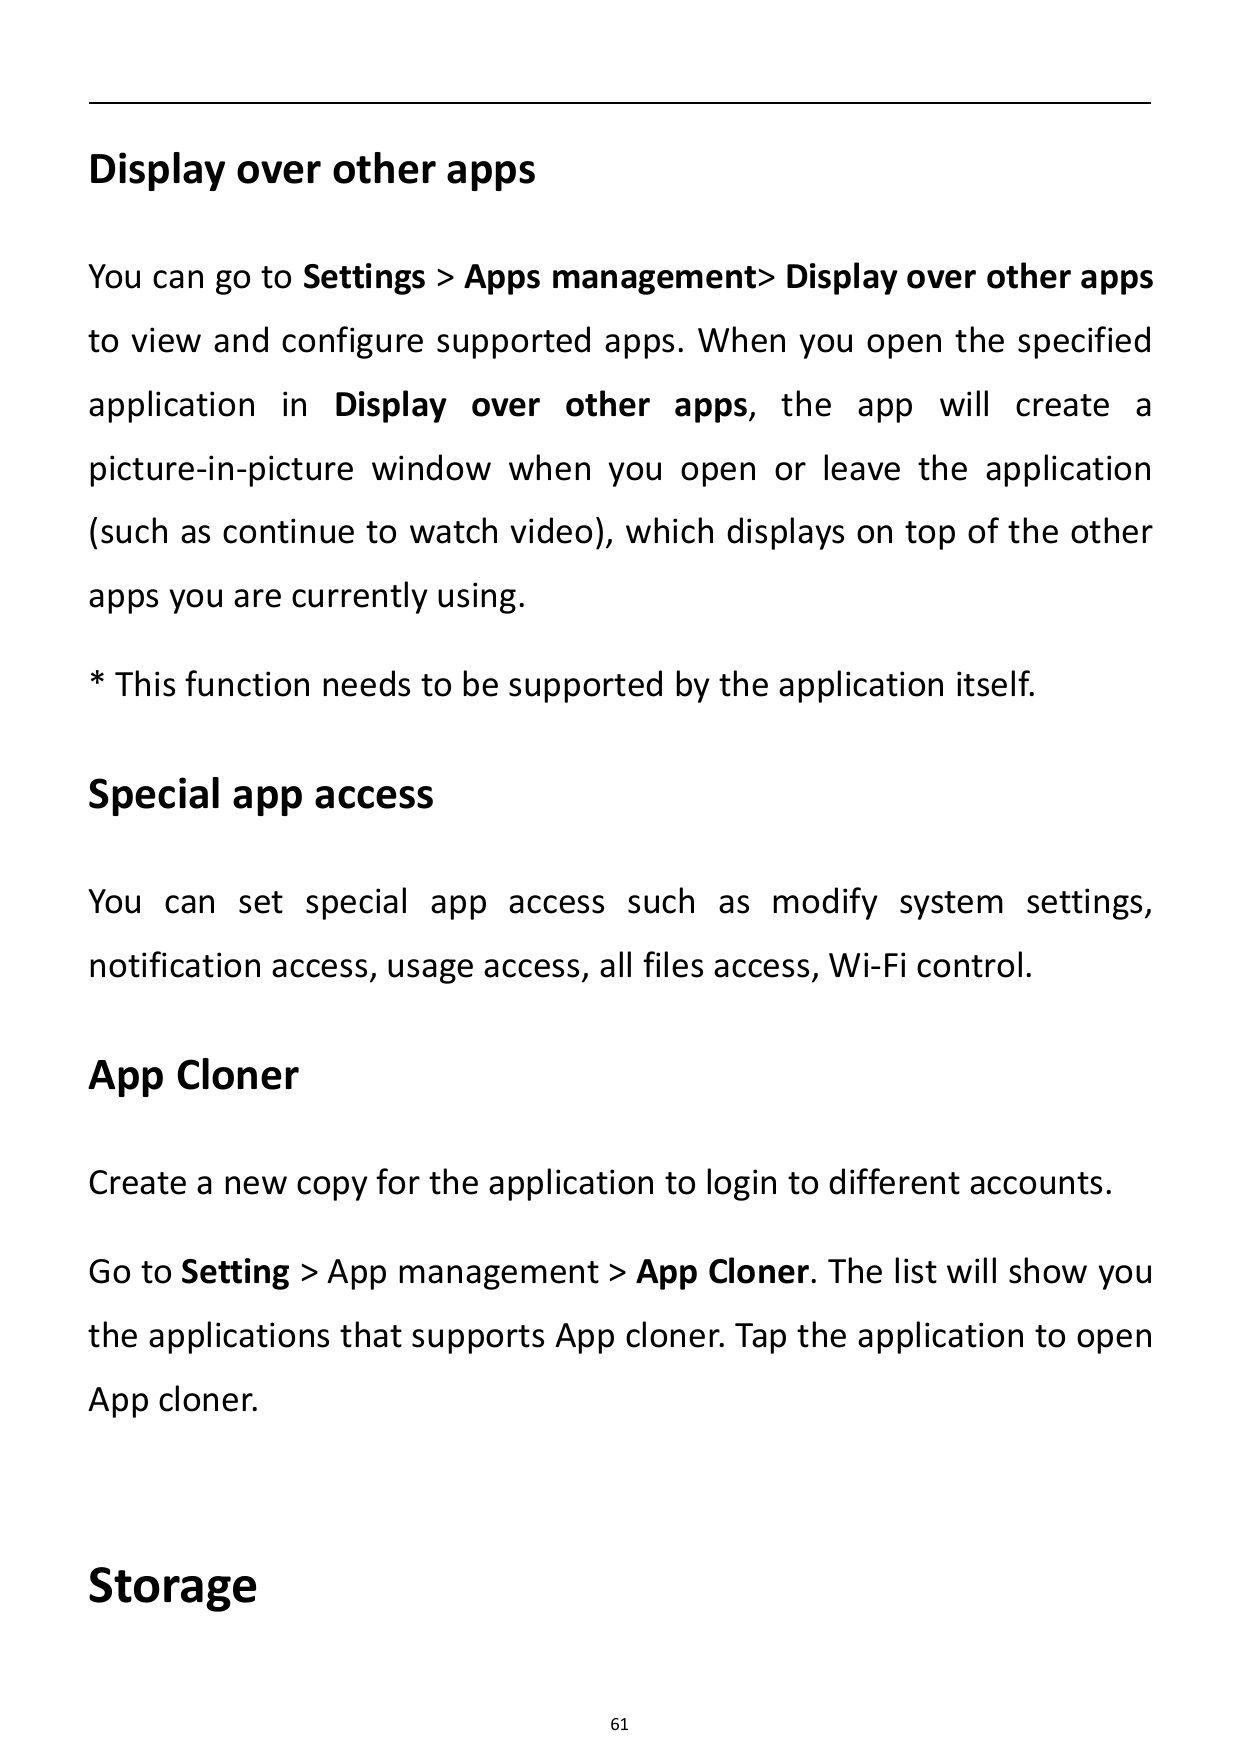 Display over other appsYou can go to Settings > Apps management> Display over other appsto view and configure supported apps. Wh